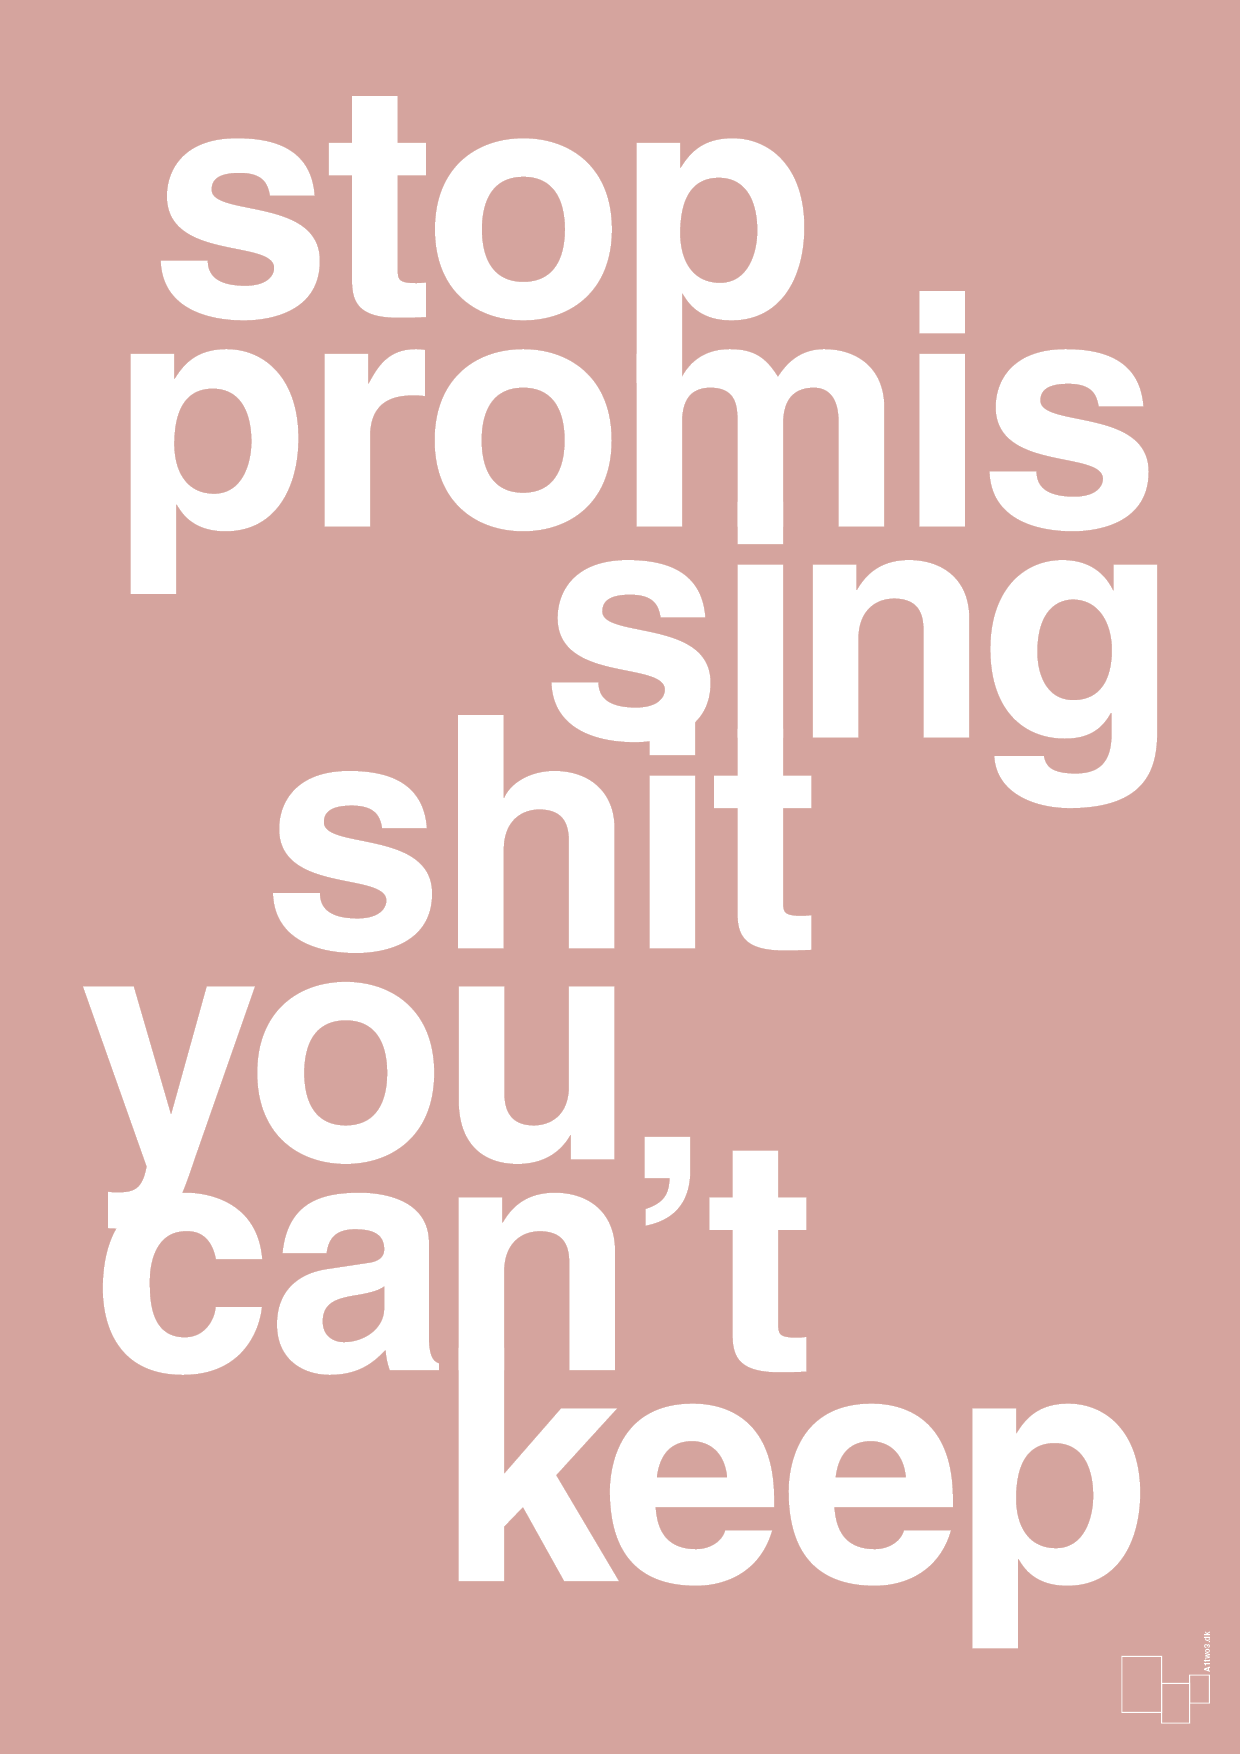 stop promissing shit you cant keep - Plakat med Ordsprog i Bubble Shell